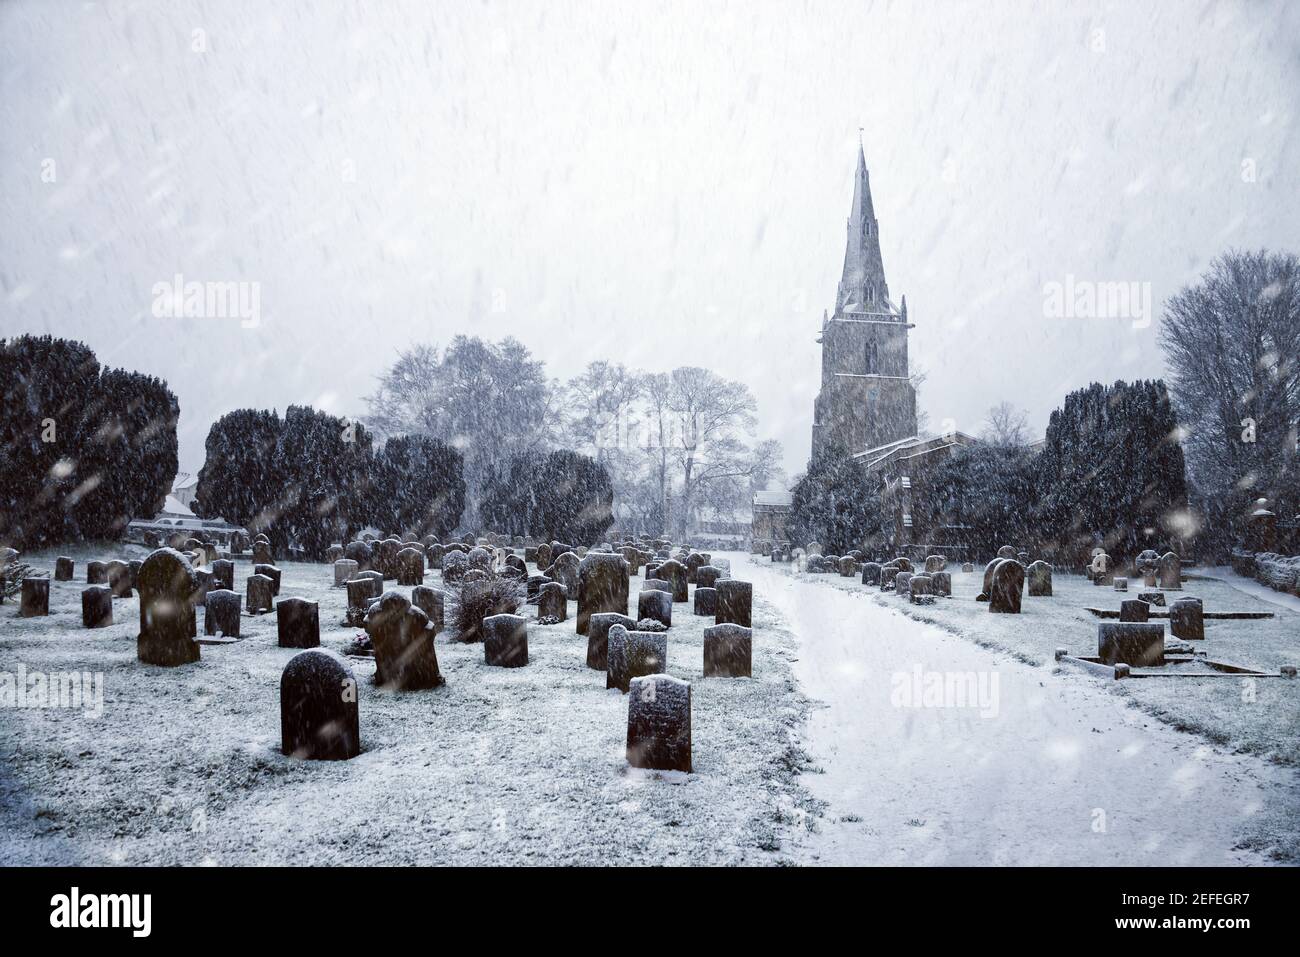 Snow scene at St Peter's Church, Sharnbrook, Bedfordshire, England, UK. Stock Photo